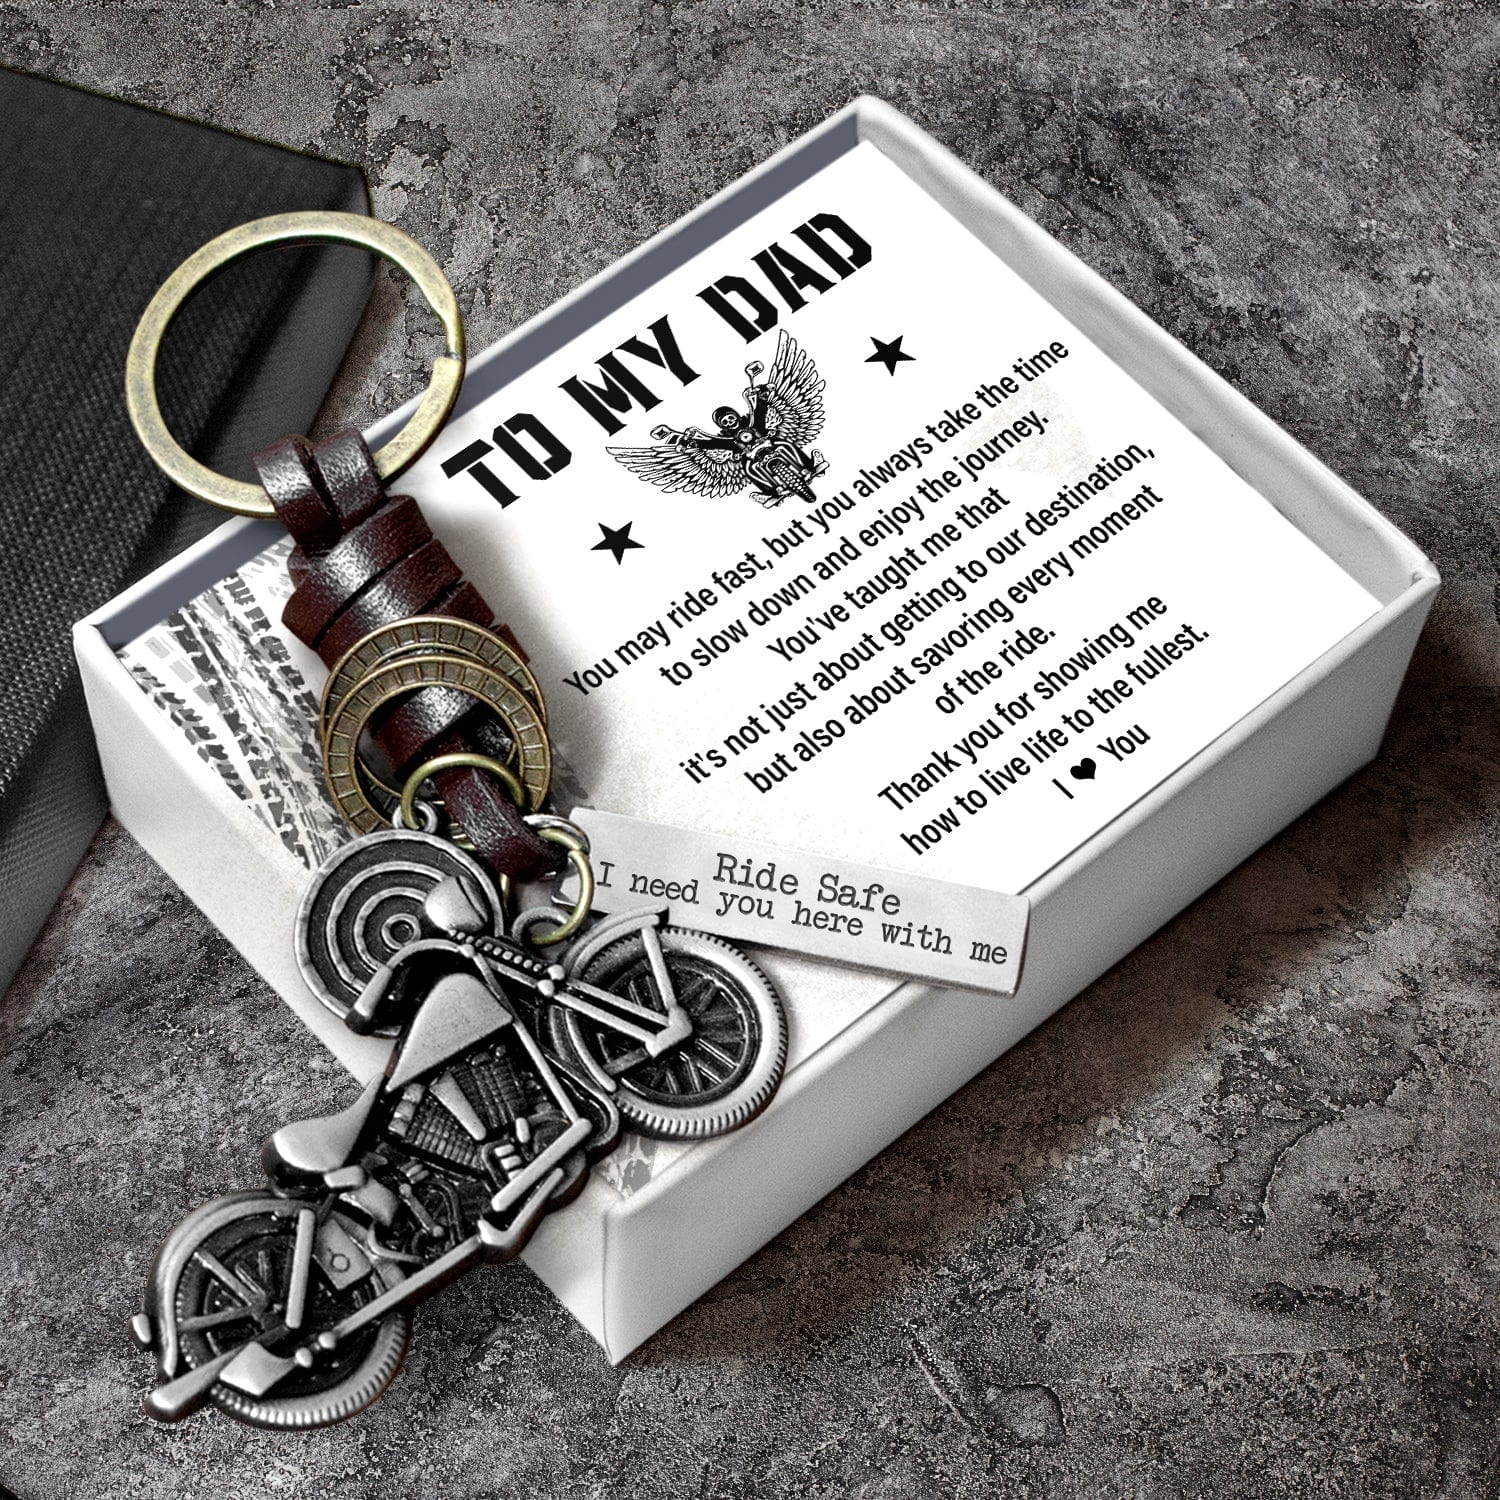 Wrapsify Classic Bike Keychain - to My Daddy - Be Safe, Stay Strong, Come Home - Gkt18002